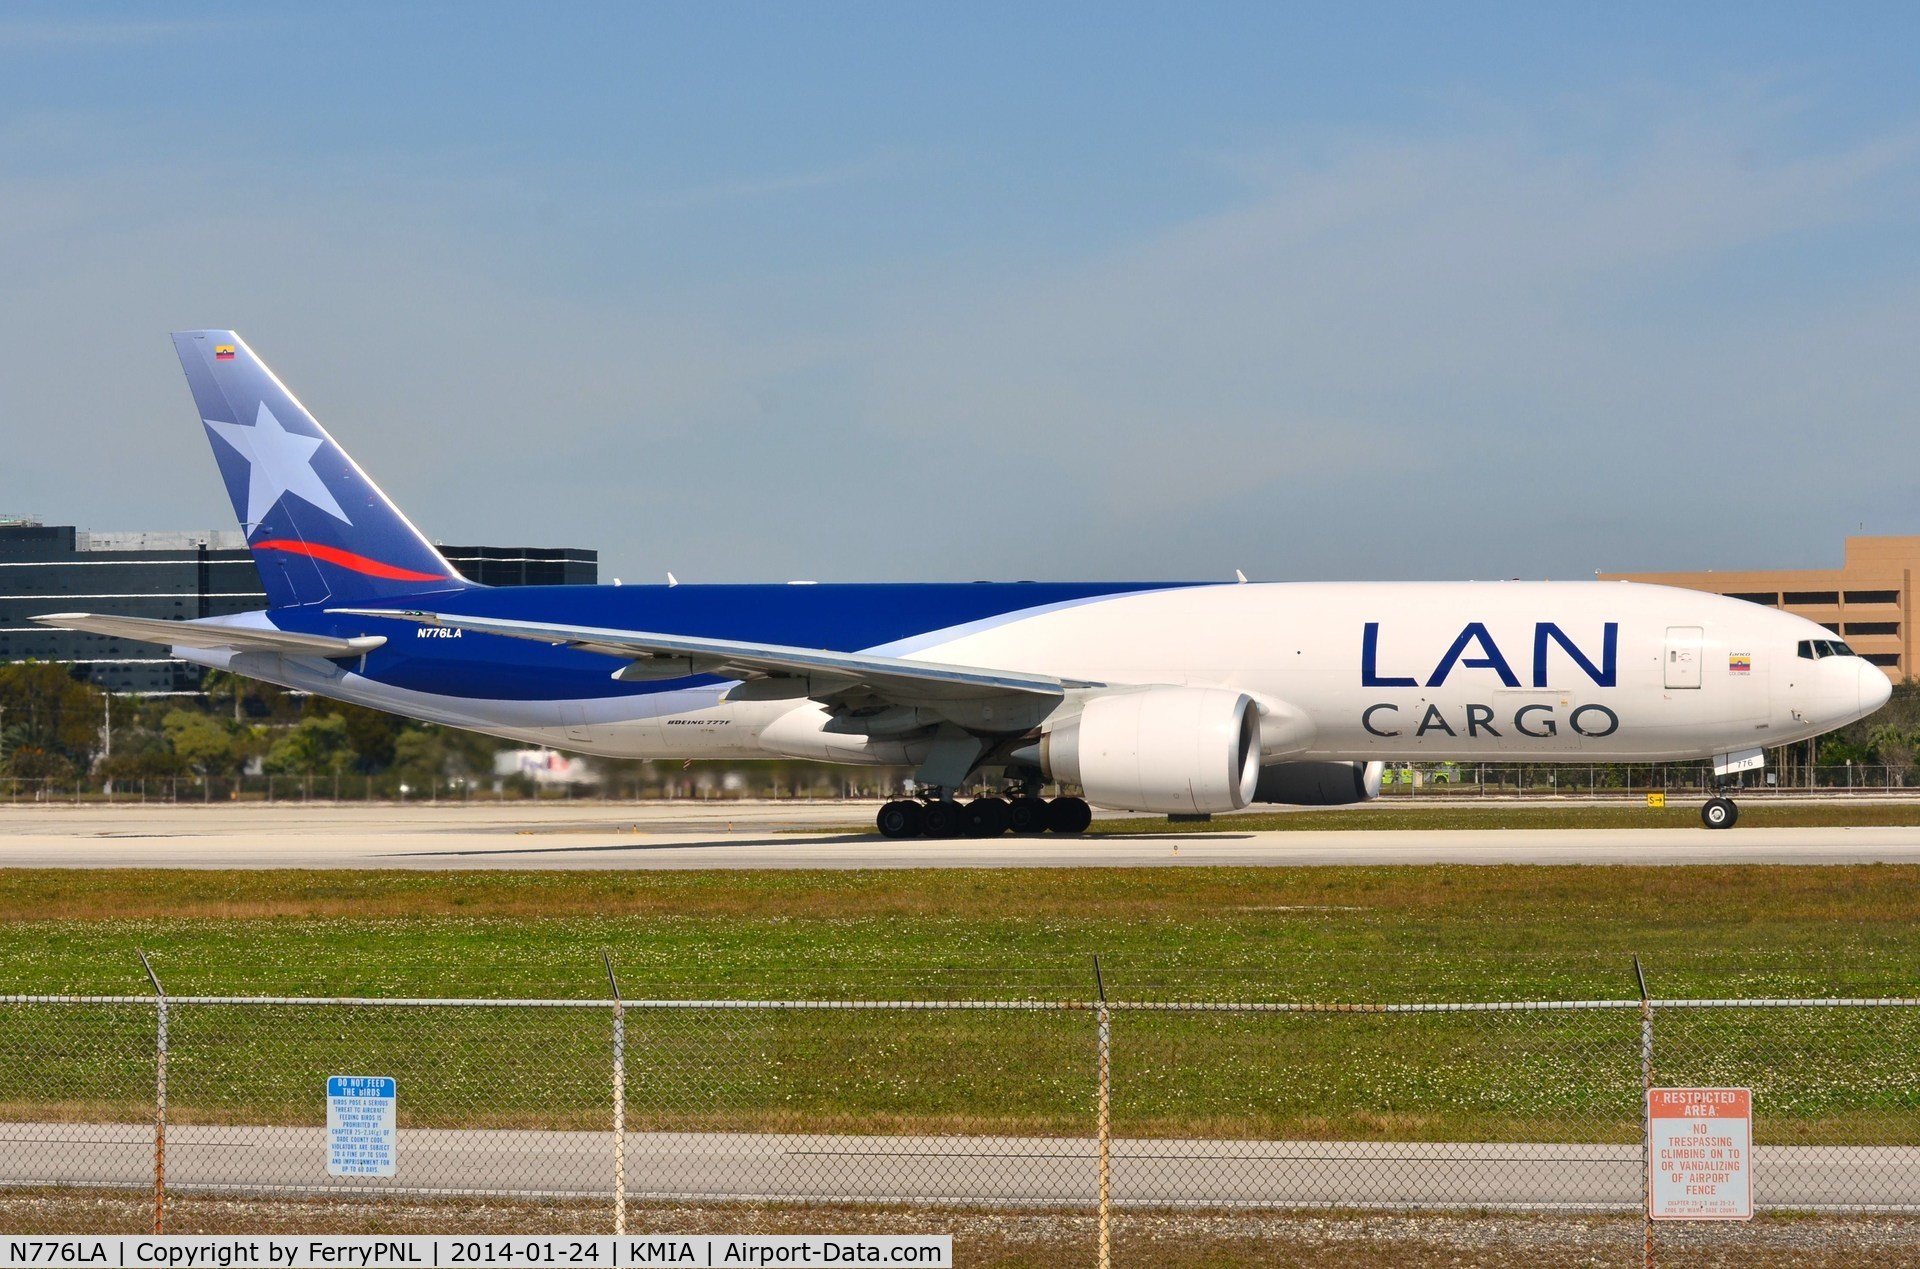 N776LA, 2012 Boeing 777-F16 C/N 38091, One of many LAN Cargo planes in today.